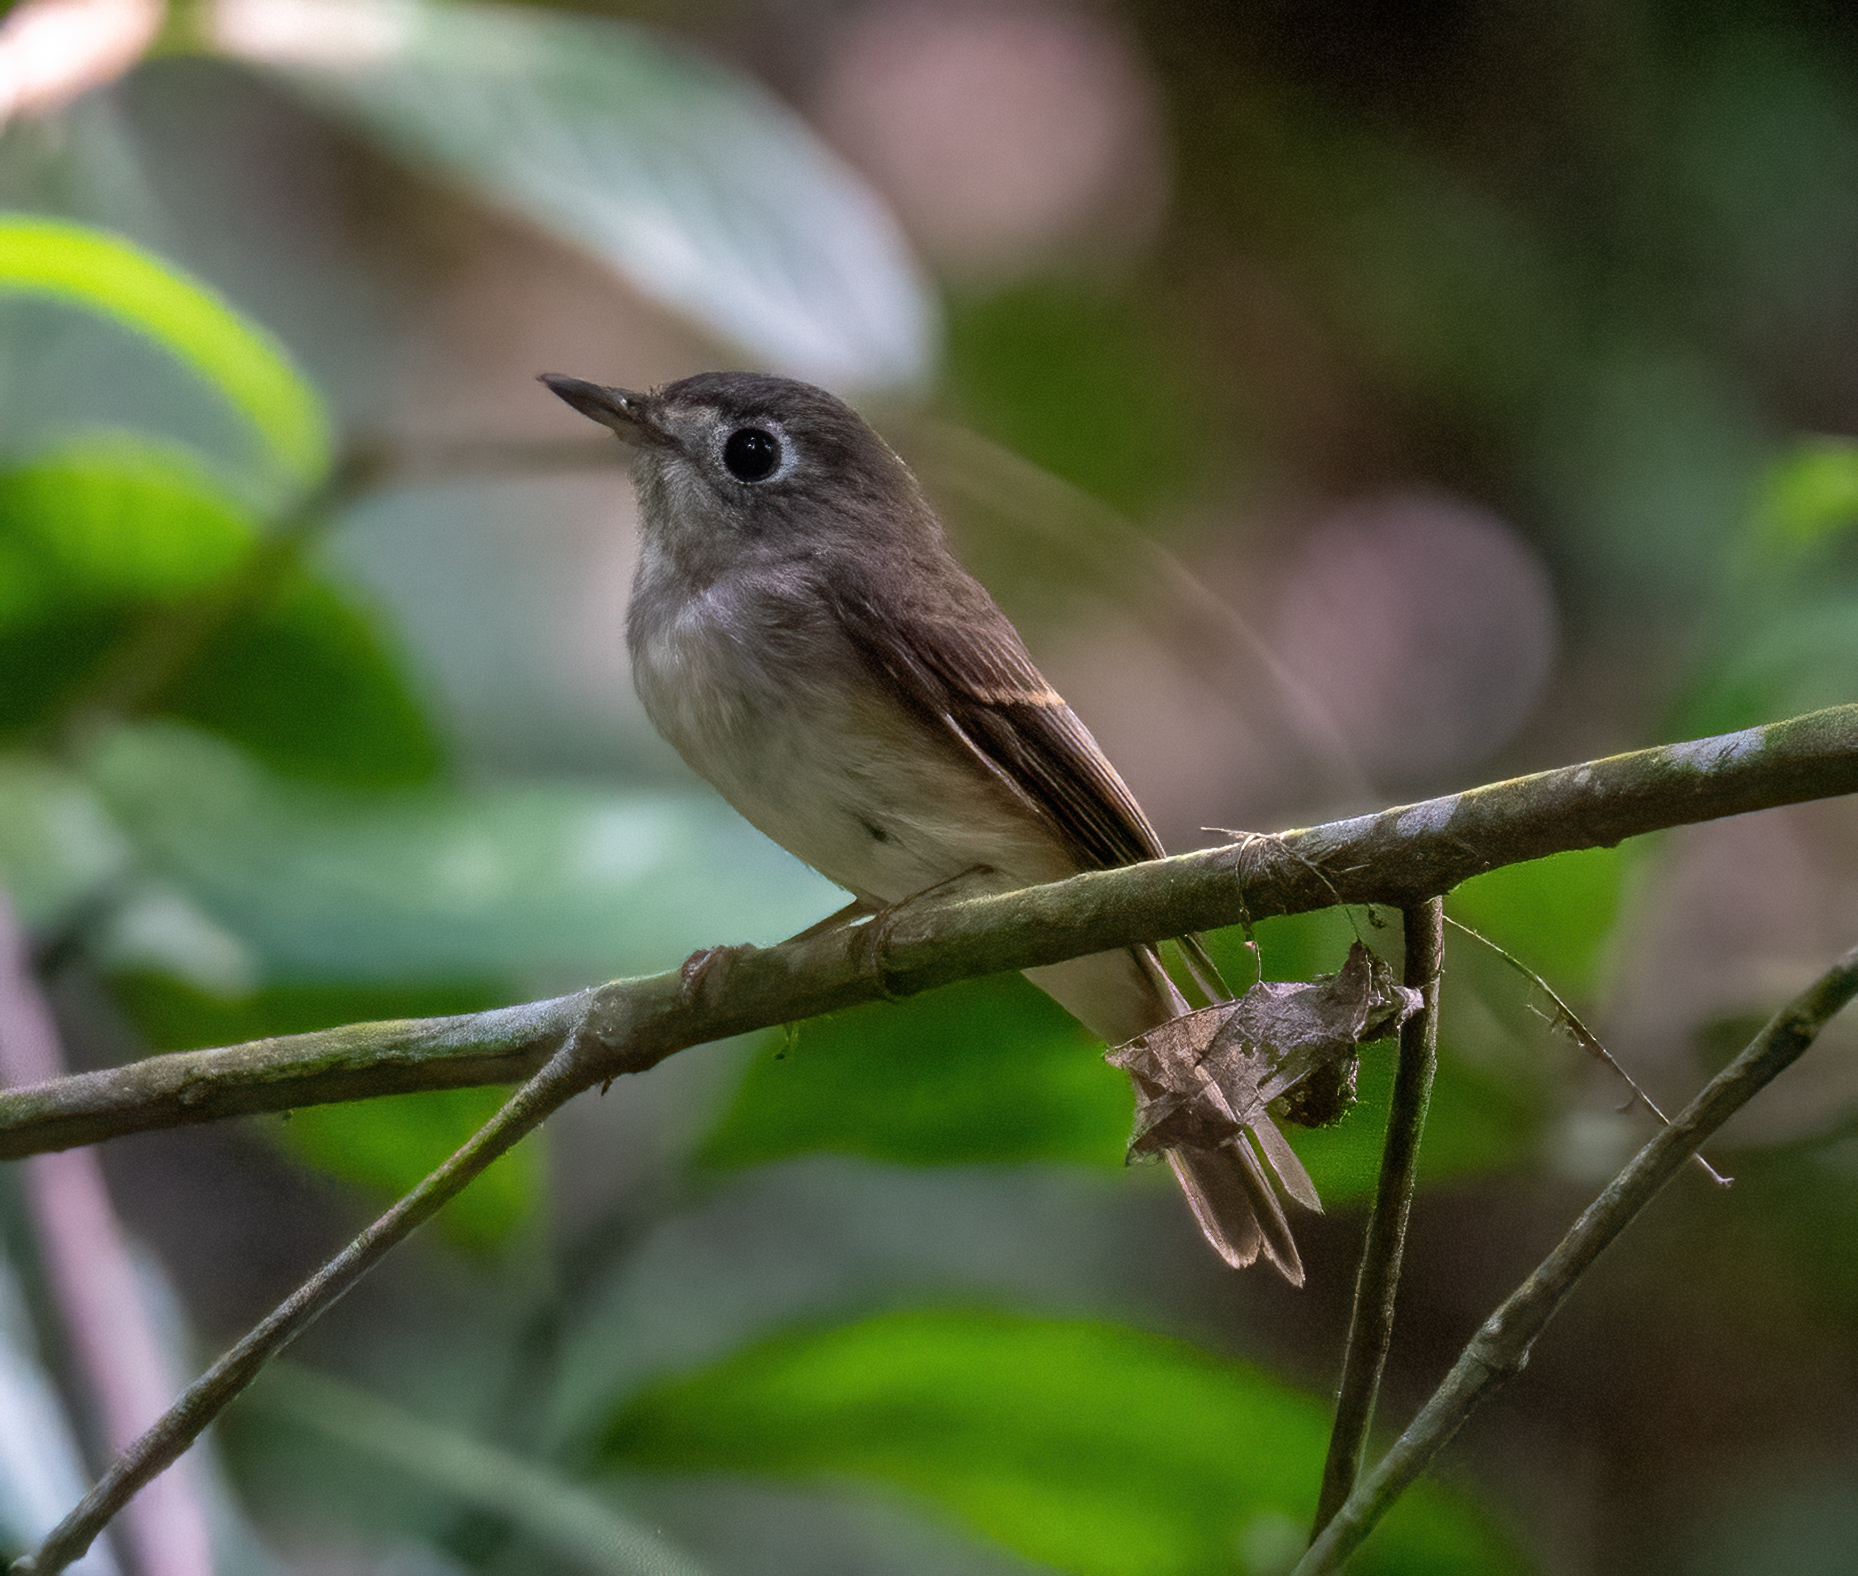 Brown-breasted Flycatcher at Dairy Farm Nature Park on 30 Oct 2022. Photo credit: Norvin Ng